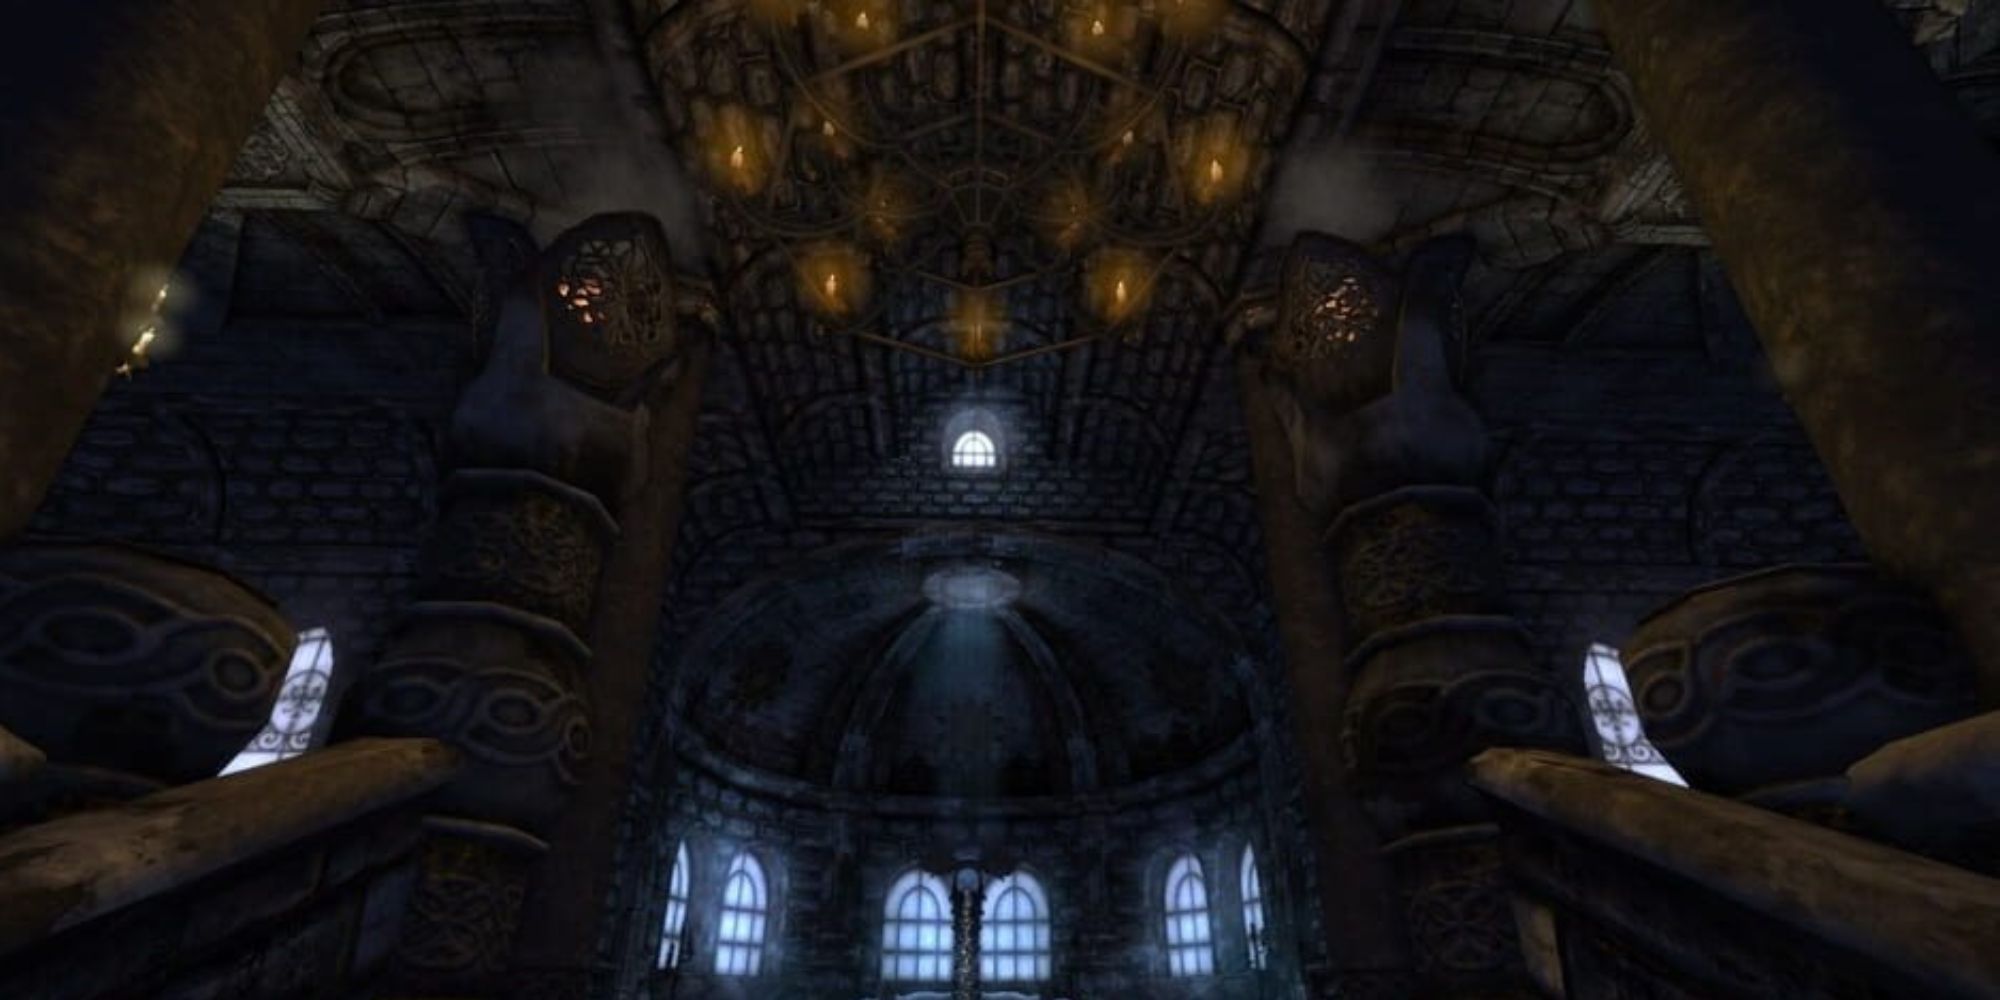 player goes up the staircase and sees the dark cathedral area with a huge chandelier hanging over with four pillars